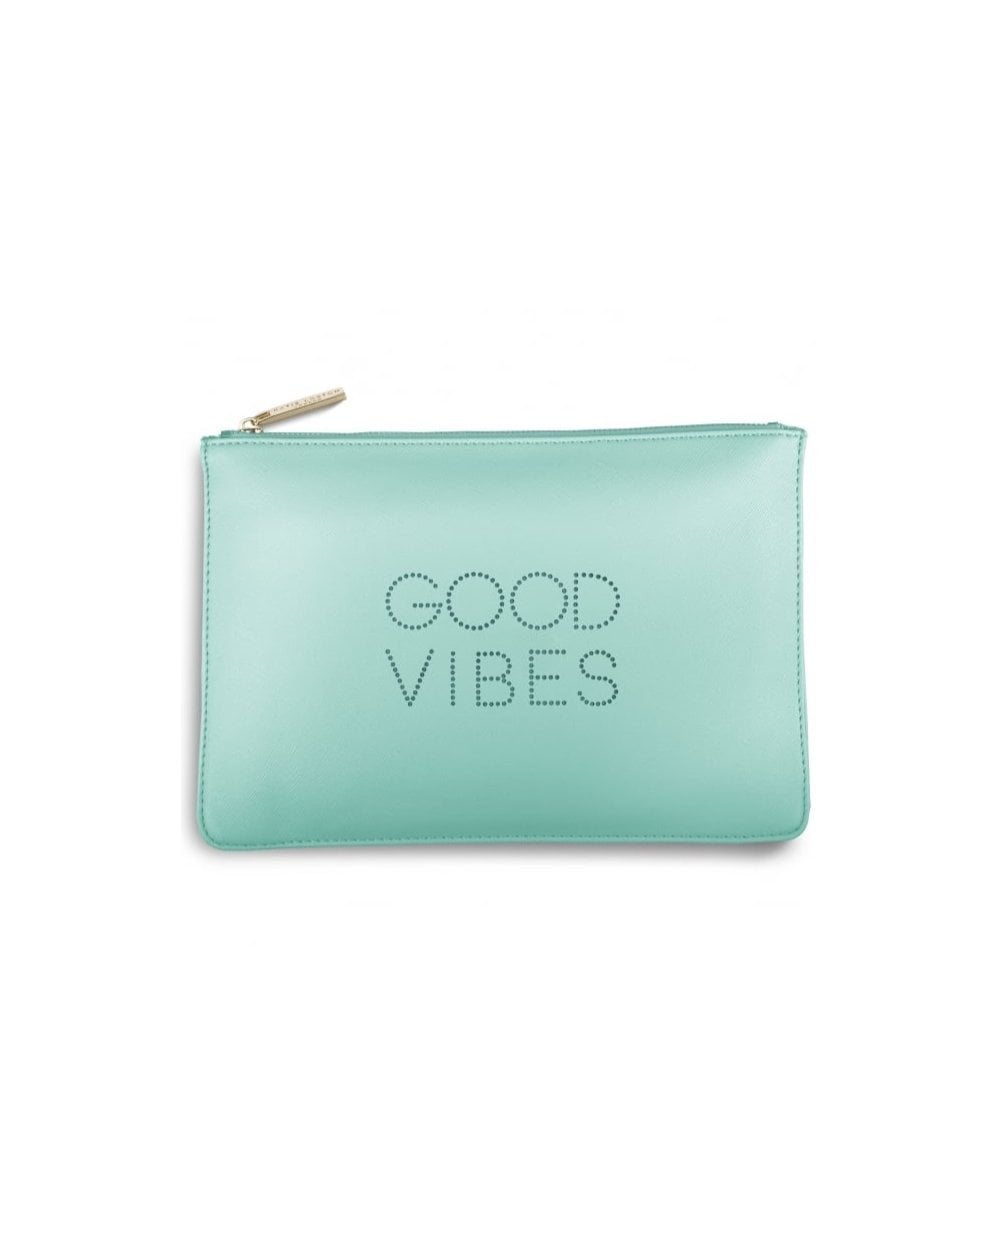 Good Vibes Polka Dot Pouch in Pale Mint